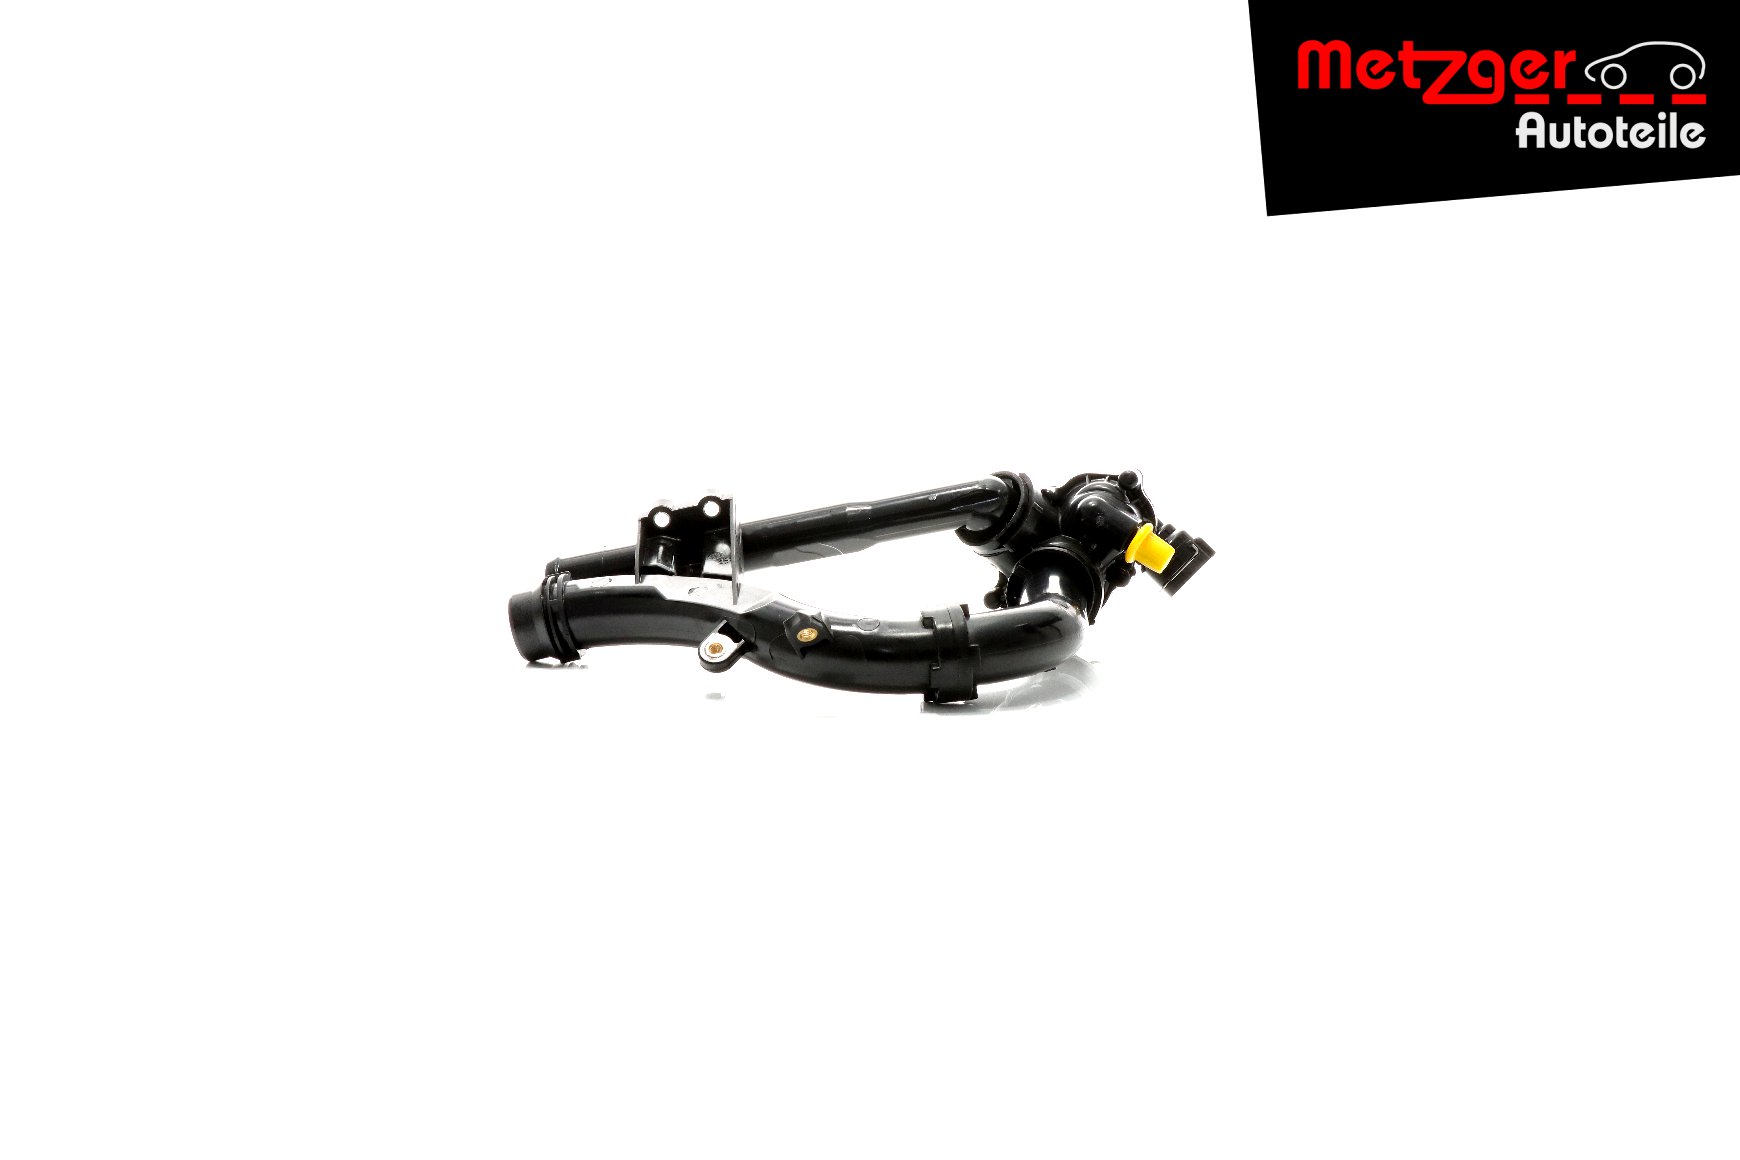 Mercedes VITO Thermostat 16178873 METZGER 4006365 online buy